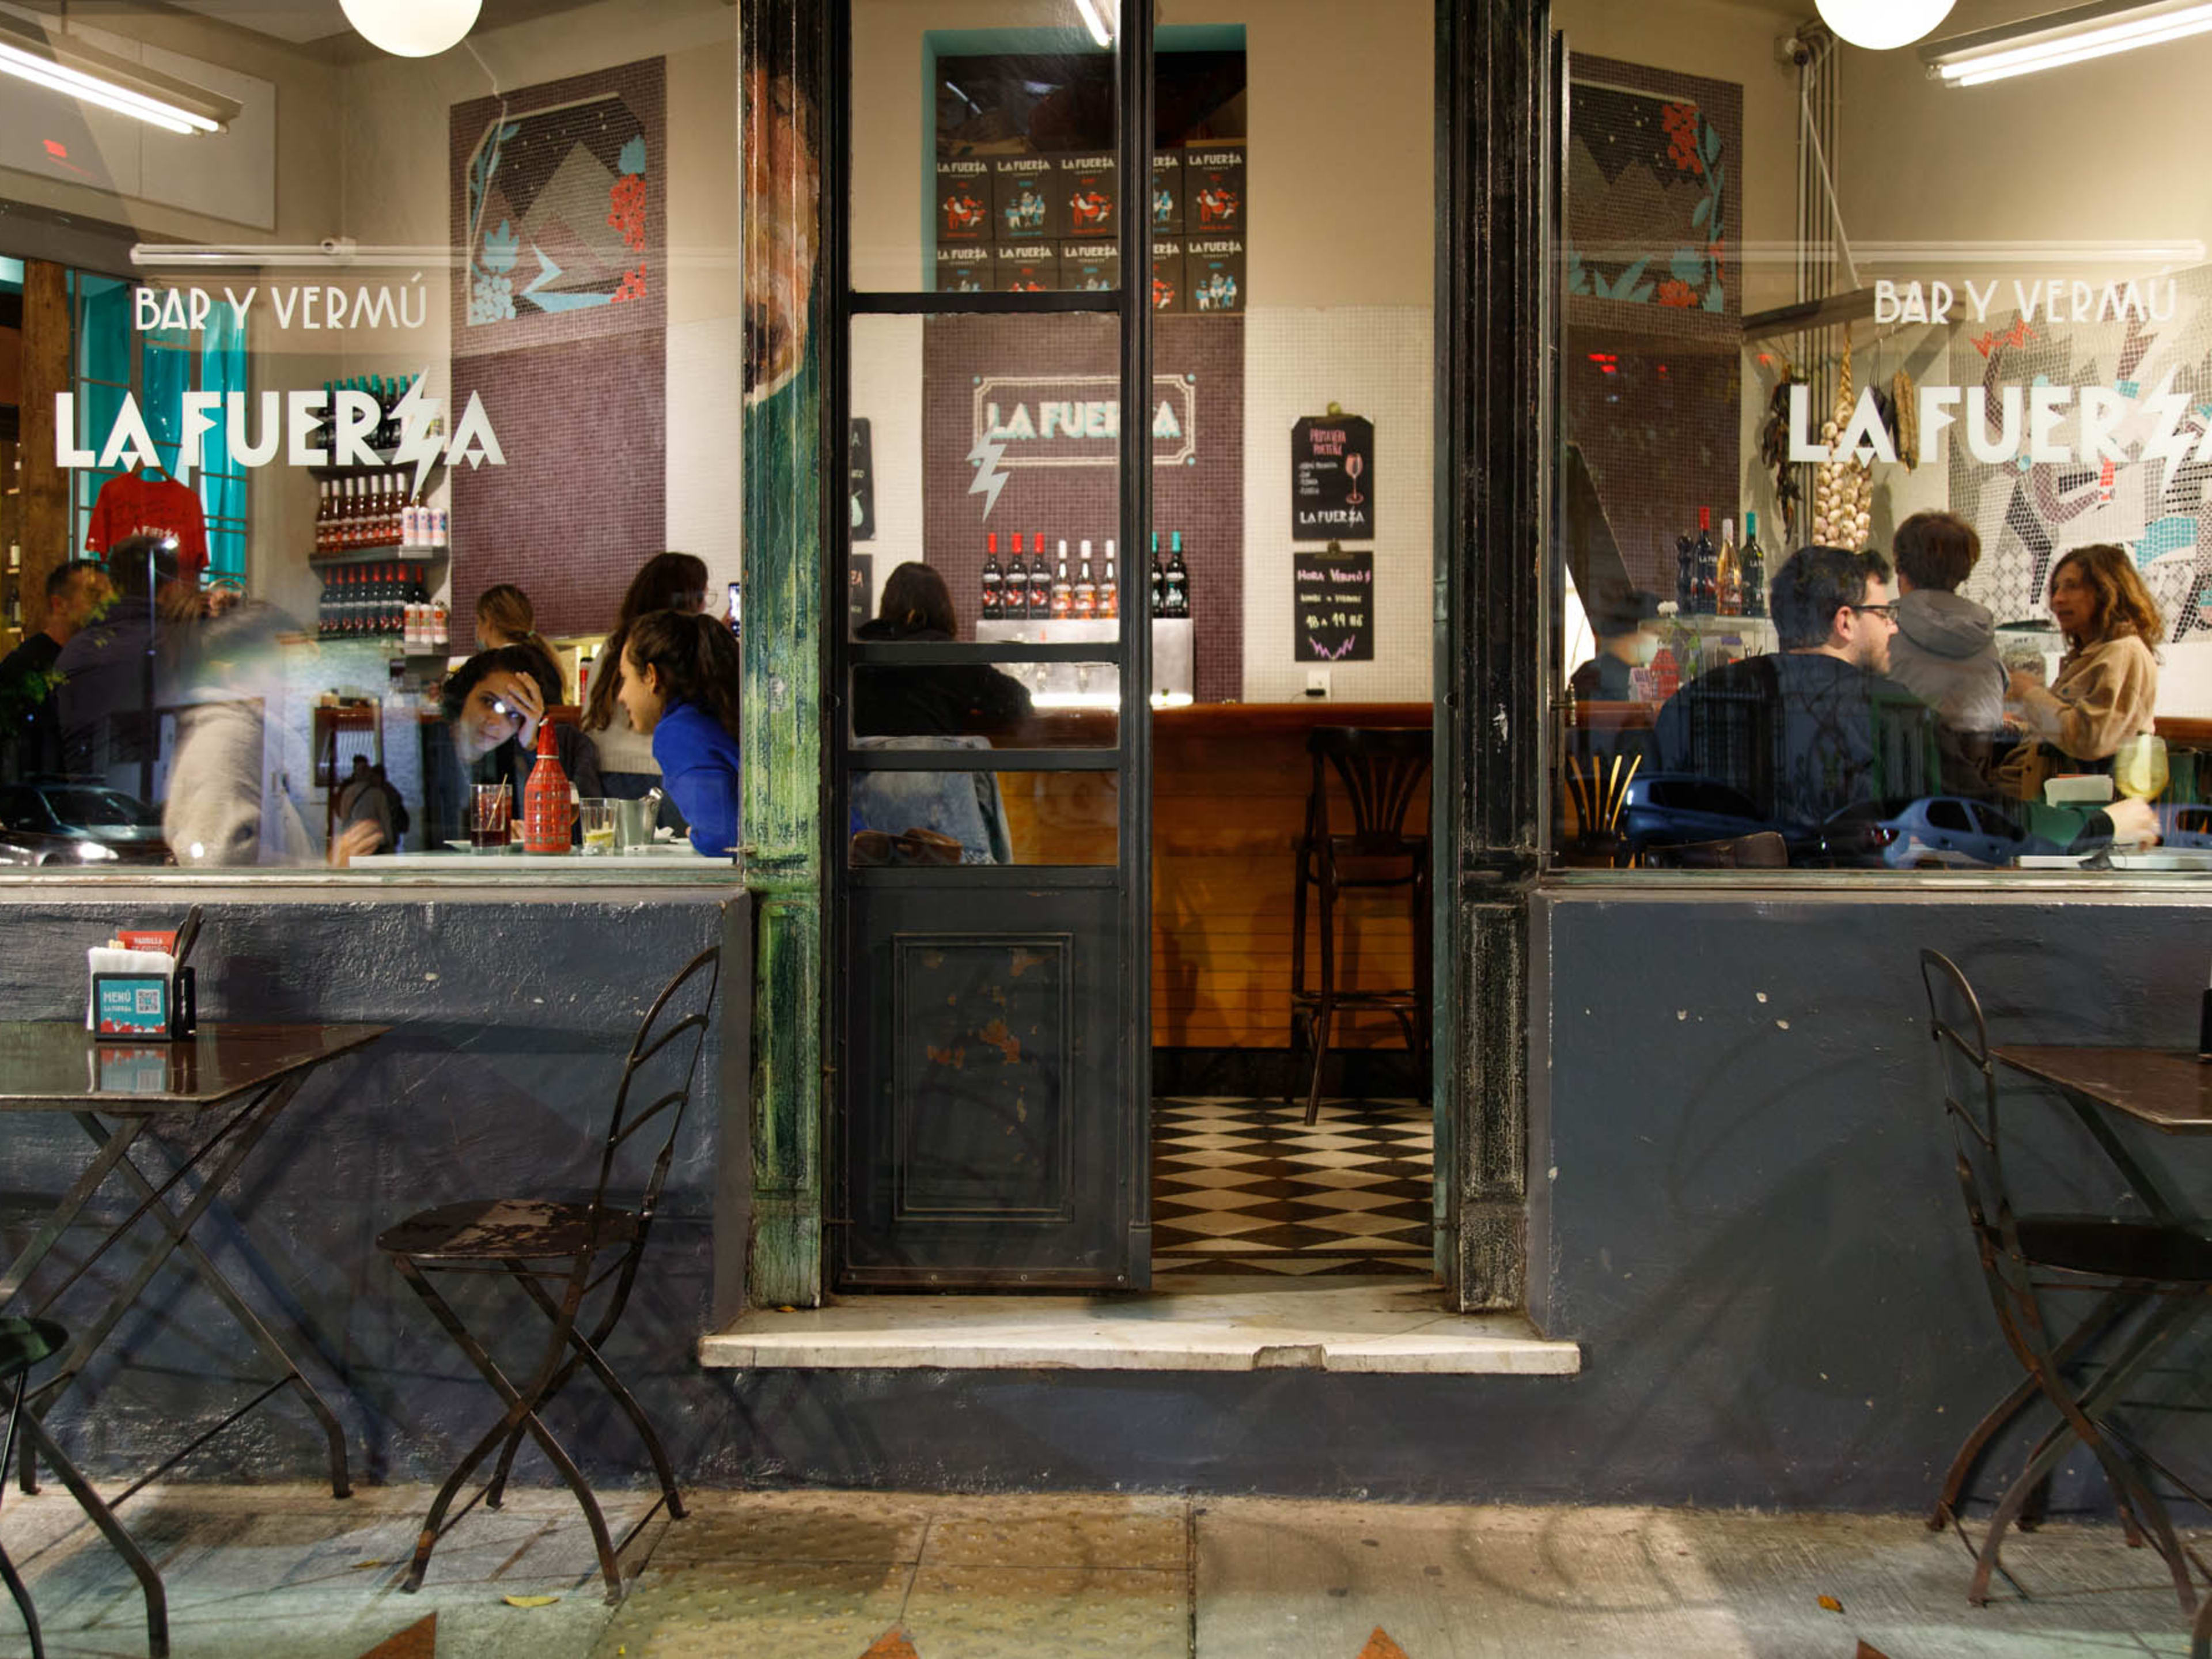 The Best Restaurants In Buenos Aires image